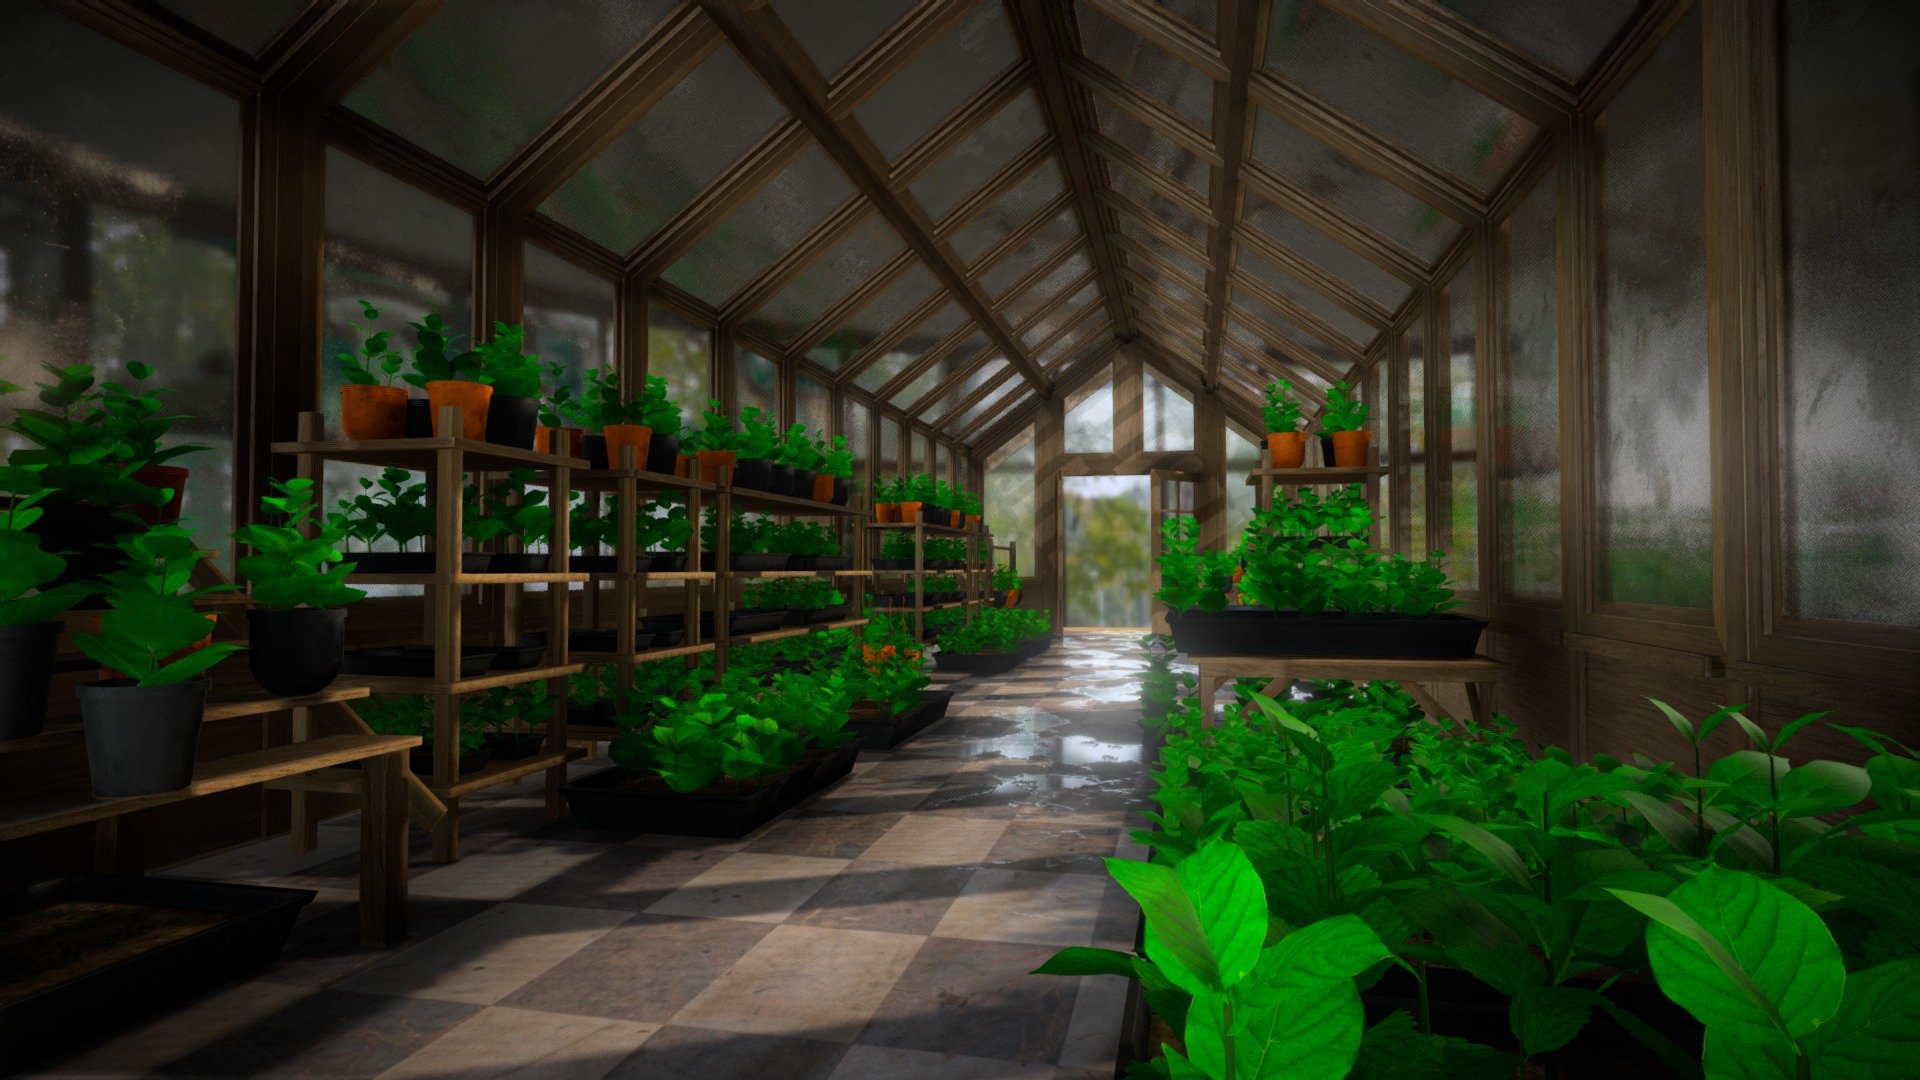 Wooden Greenhouse with Plants

Asset Pack Description:-

5 types of plant mesh with size variation
Modular wooden Structure
Pot mesh with plants Variation
fbx included
Textures Included

Additional Files Structure:-

Export Folder contain all the fbx model
Texture folder contain all the Textures
Wooden Greenhouse Blend File and Export Blend File

Thank You!
Contact me :nk.vmc.s@gmail.com - Wooden Greenhouse with Plants - Buy Royalty Free 3D model by Nicholas-3D (@Nicholas01) 3d model